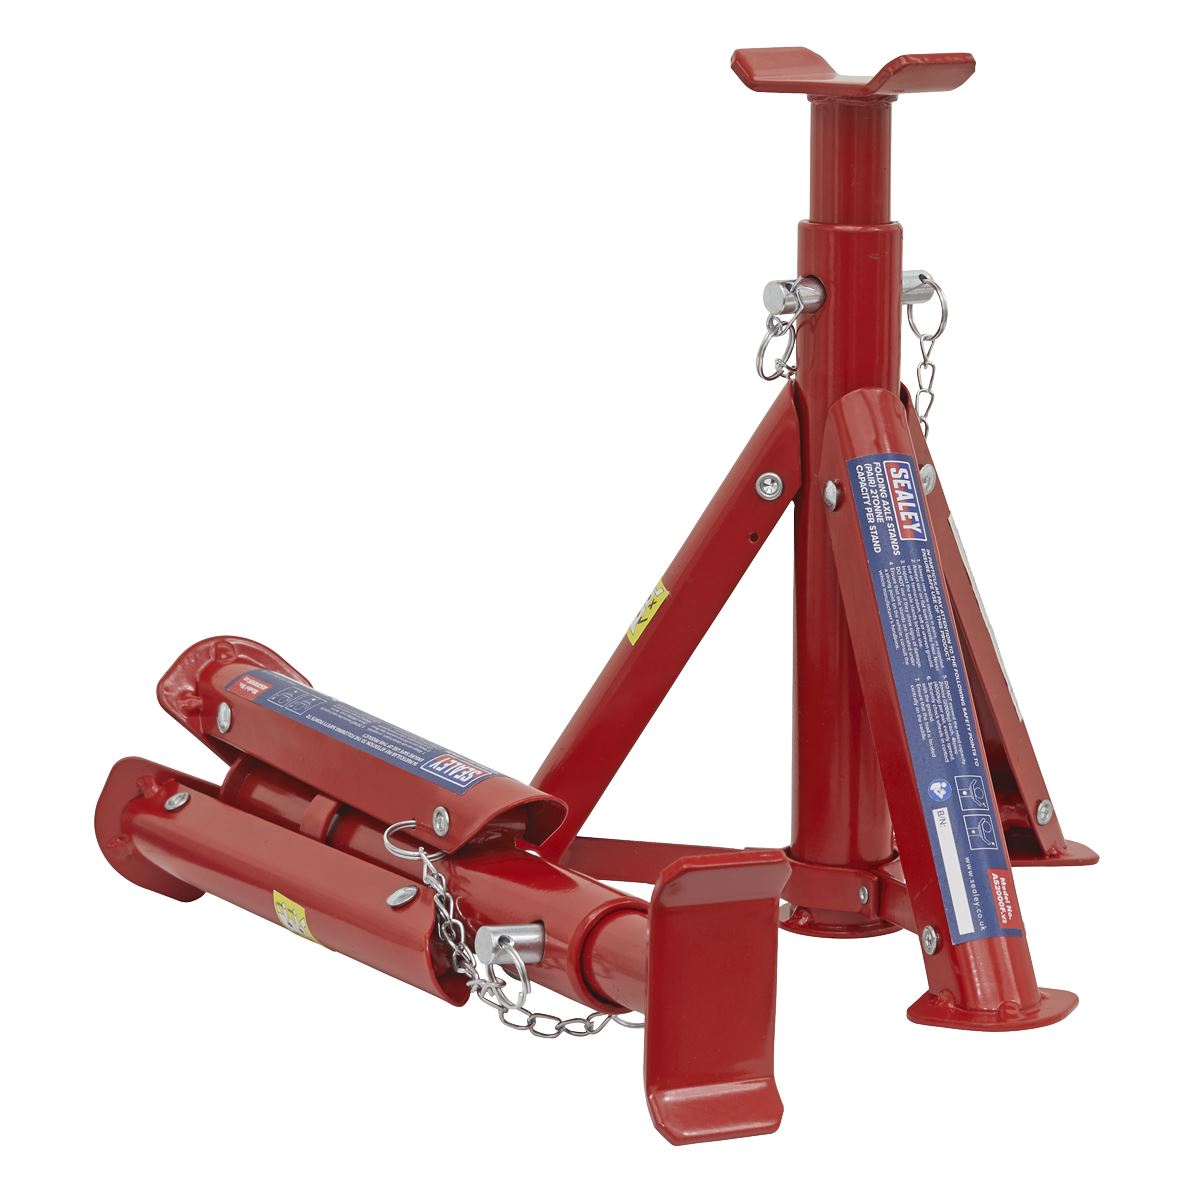 Sealey Folding Type Axle Stands (Pair) 2 Tonne Capacity per Stand